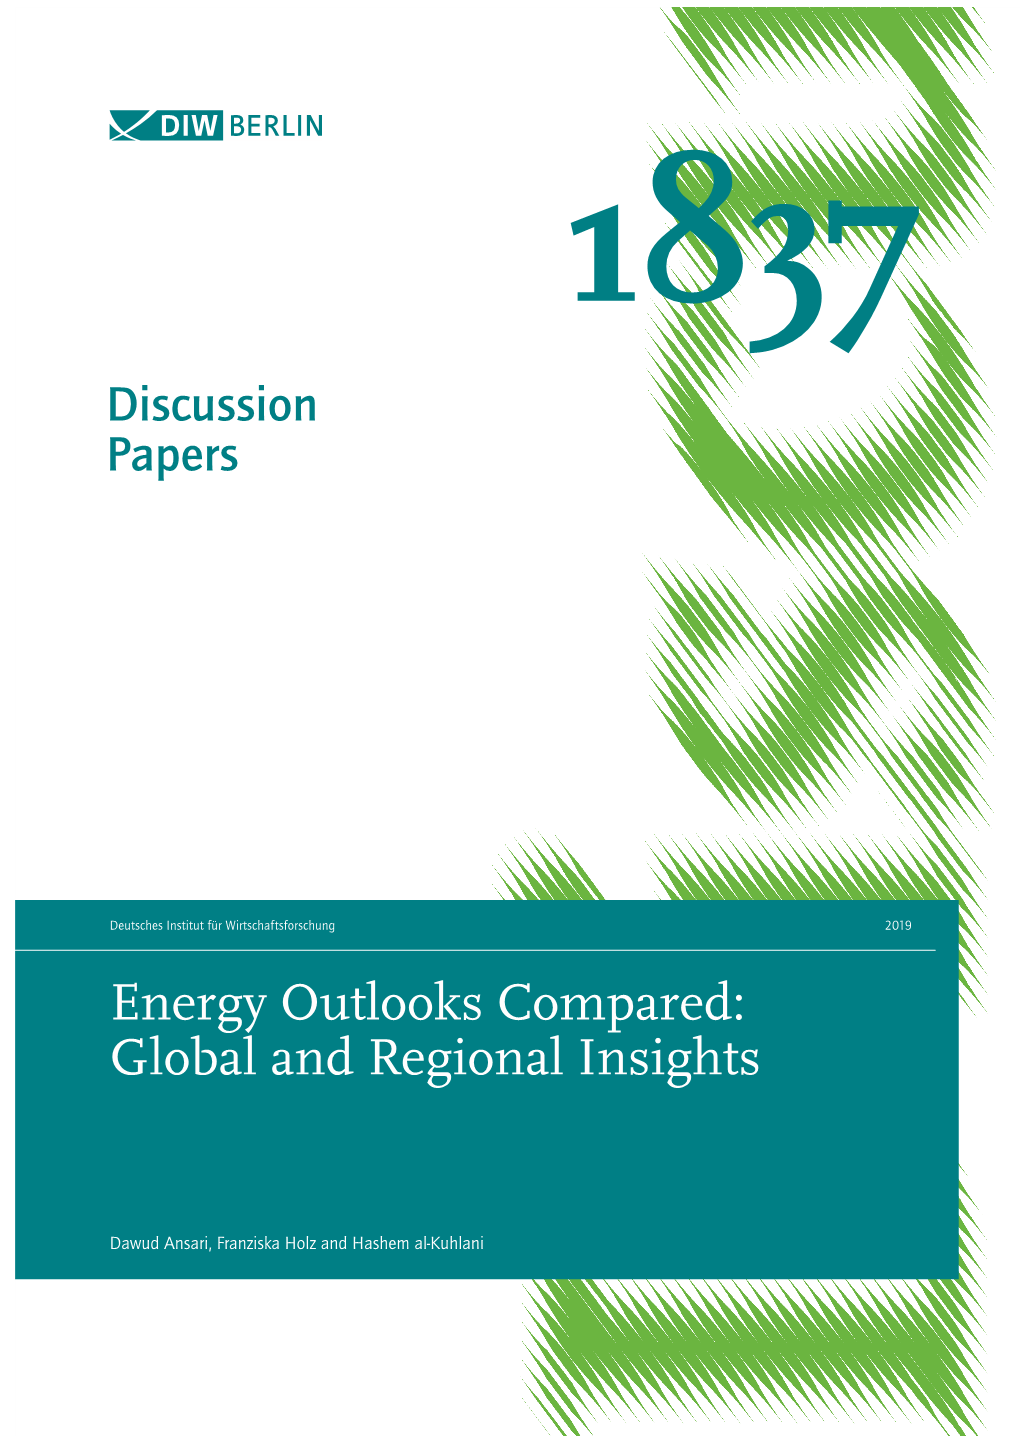 Energy Outlooks Compared: Global and Regional Insights